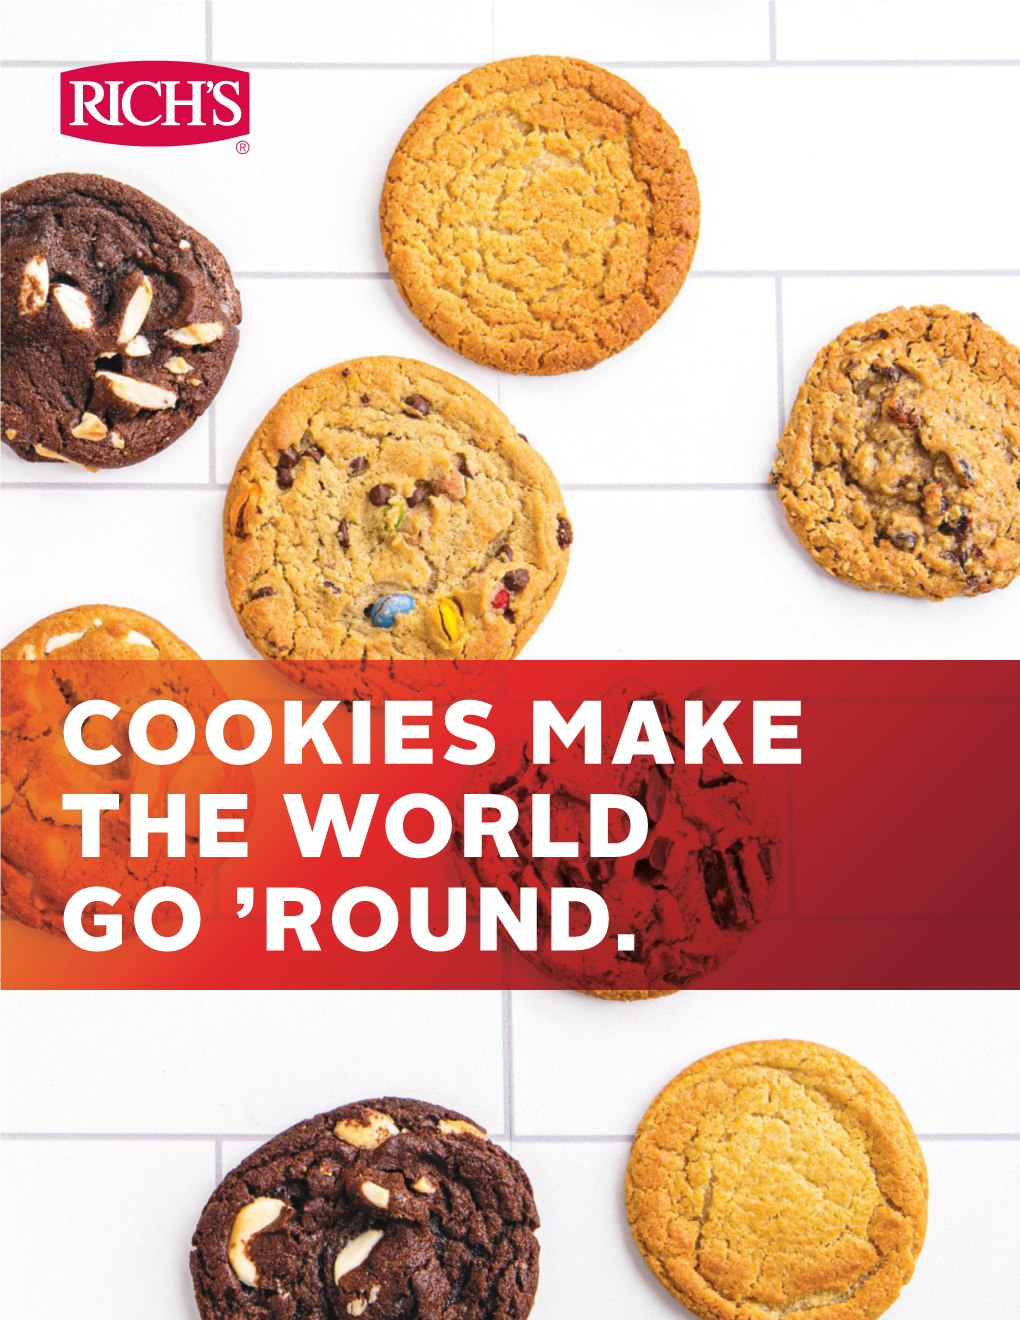 Rich's Full Cookie Line Brochure | Doughs & Baked Cookies | Rich's